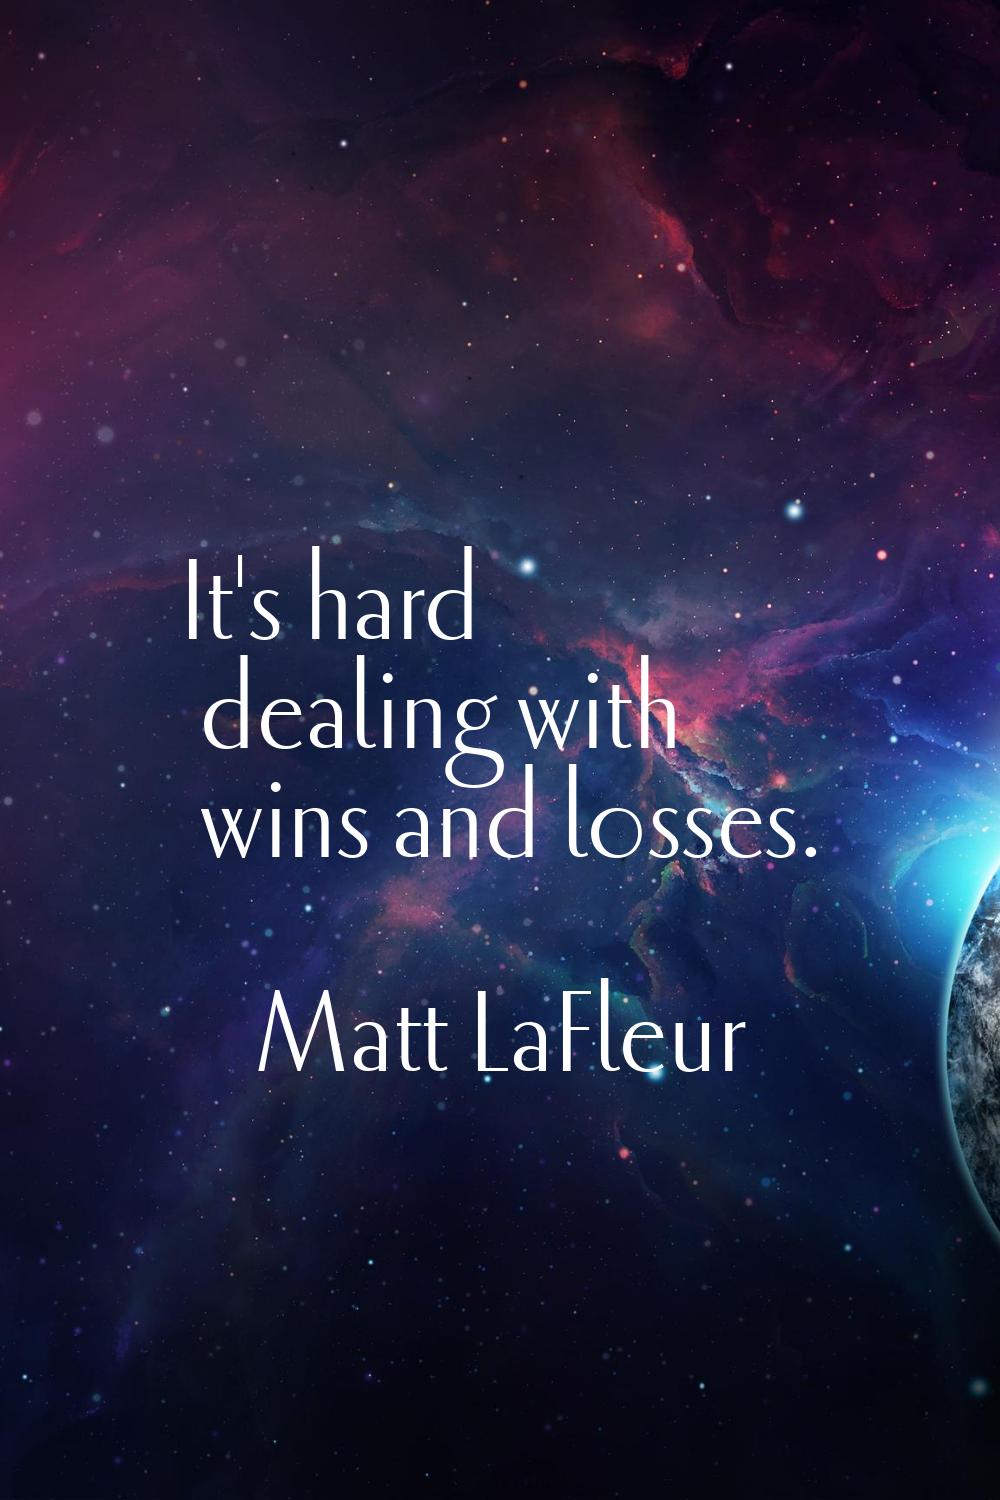 It's hard dealing with wins and losses.